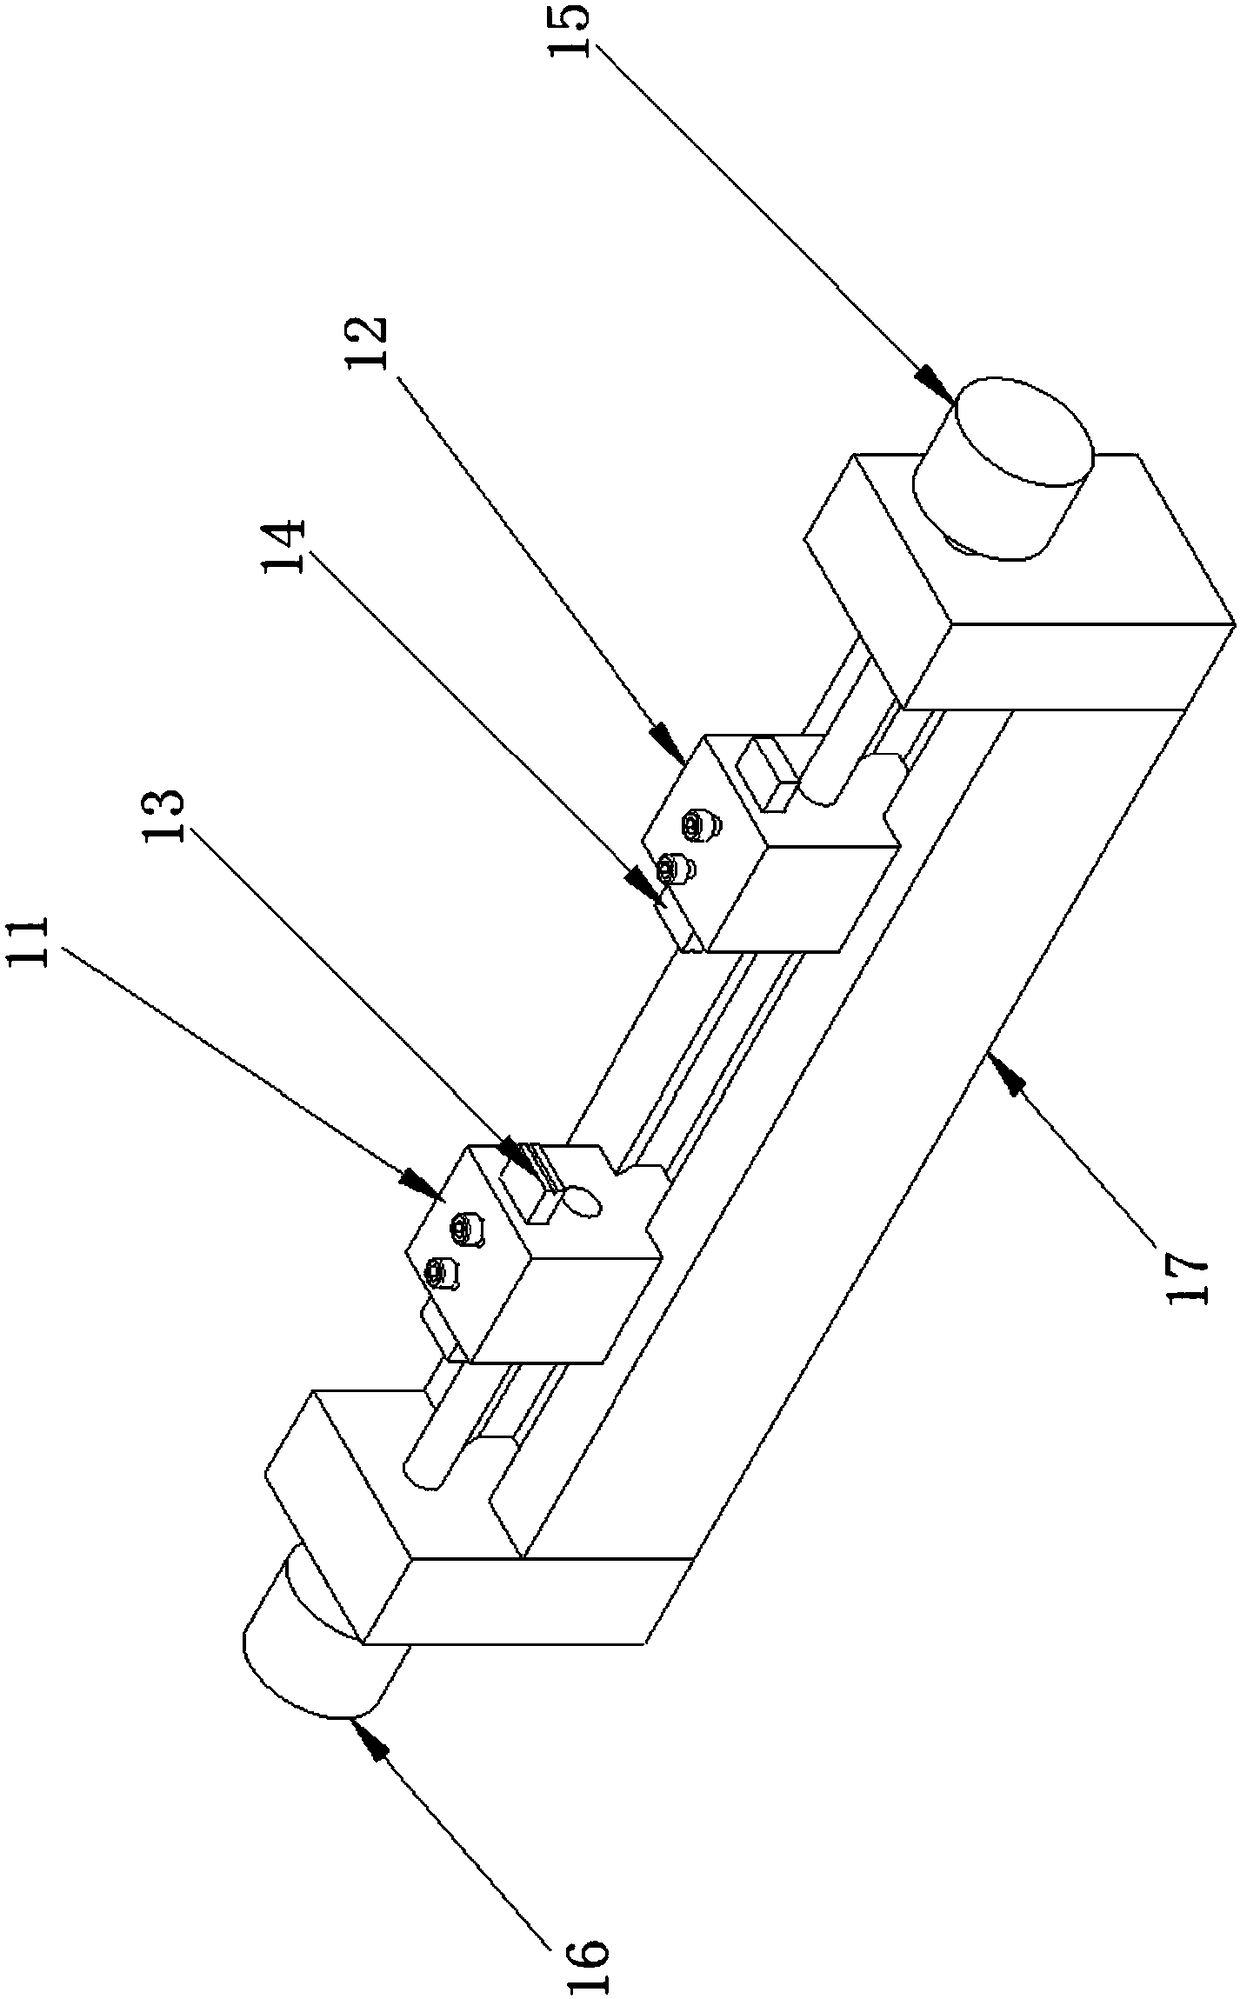 Self-adaptive knife holder and self-adaptive method for edge trimming of ultra-soft metal foil